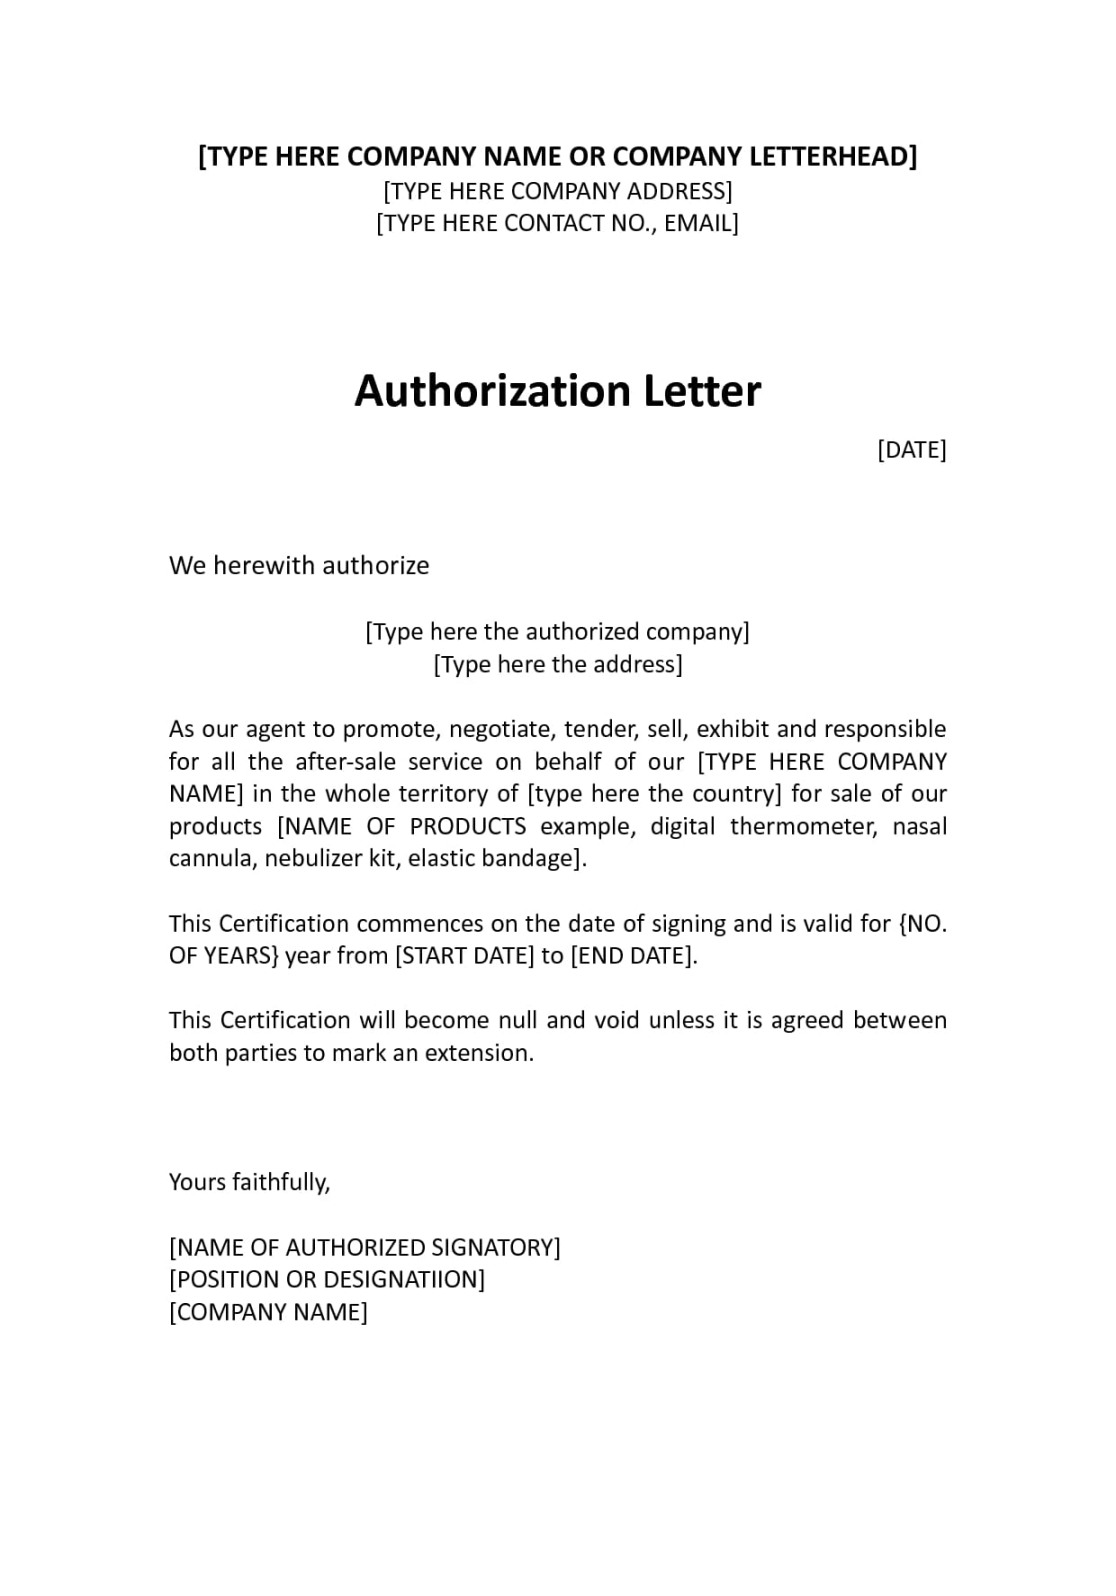 Agent Authorization Letter - + Examples, Format, Pdf  Examples